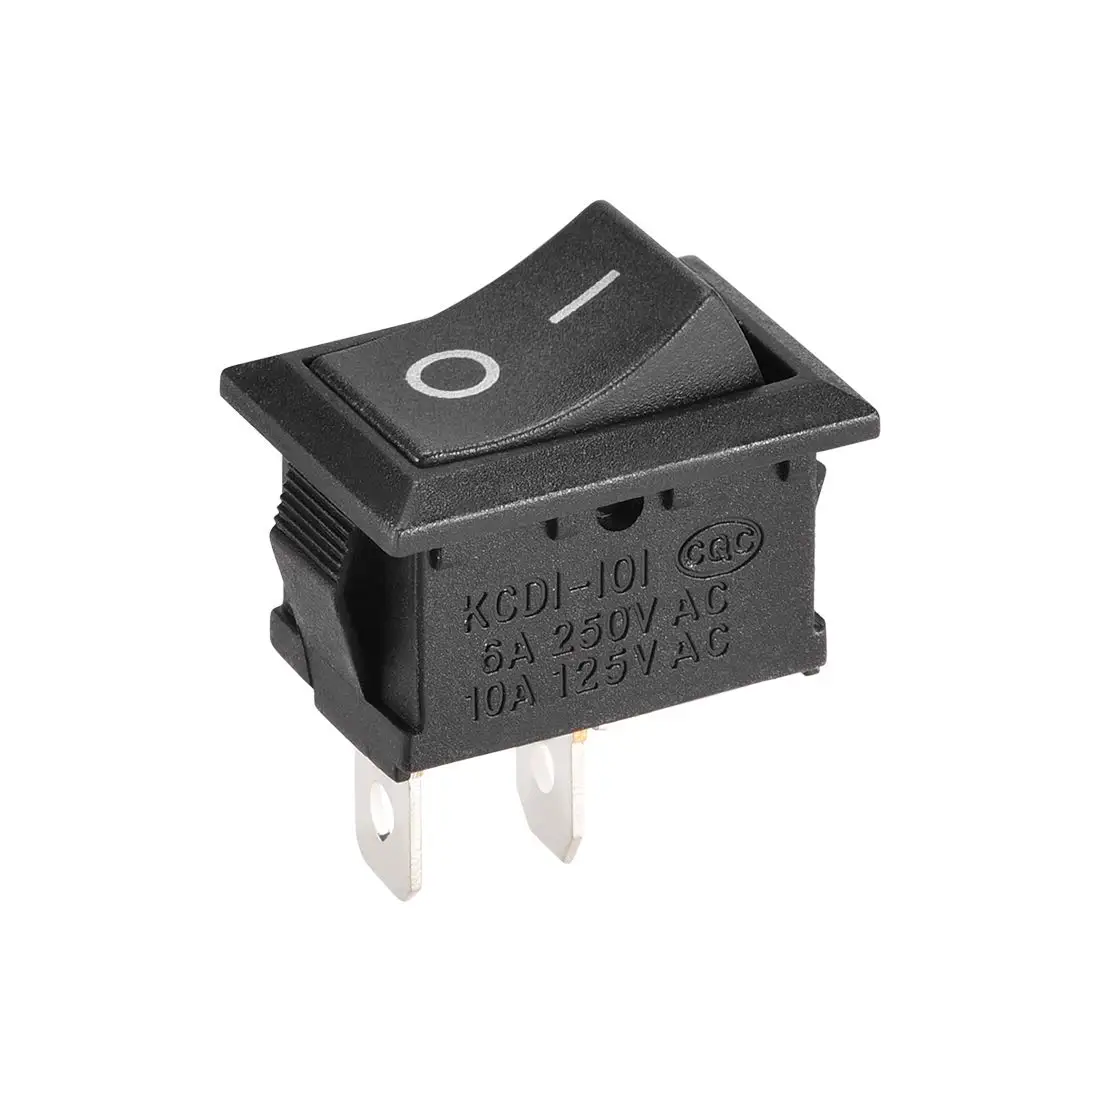 

Keszoox SPST 2 Position On/Off 2Pin Boat Rocker Switch Toggle AC 250V/6A 125V/10A,for Boat,Household Appliances,Snap,Black